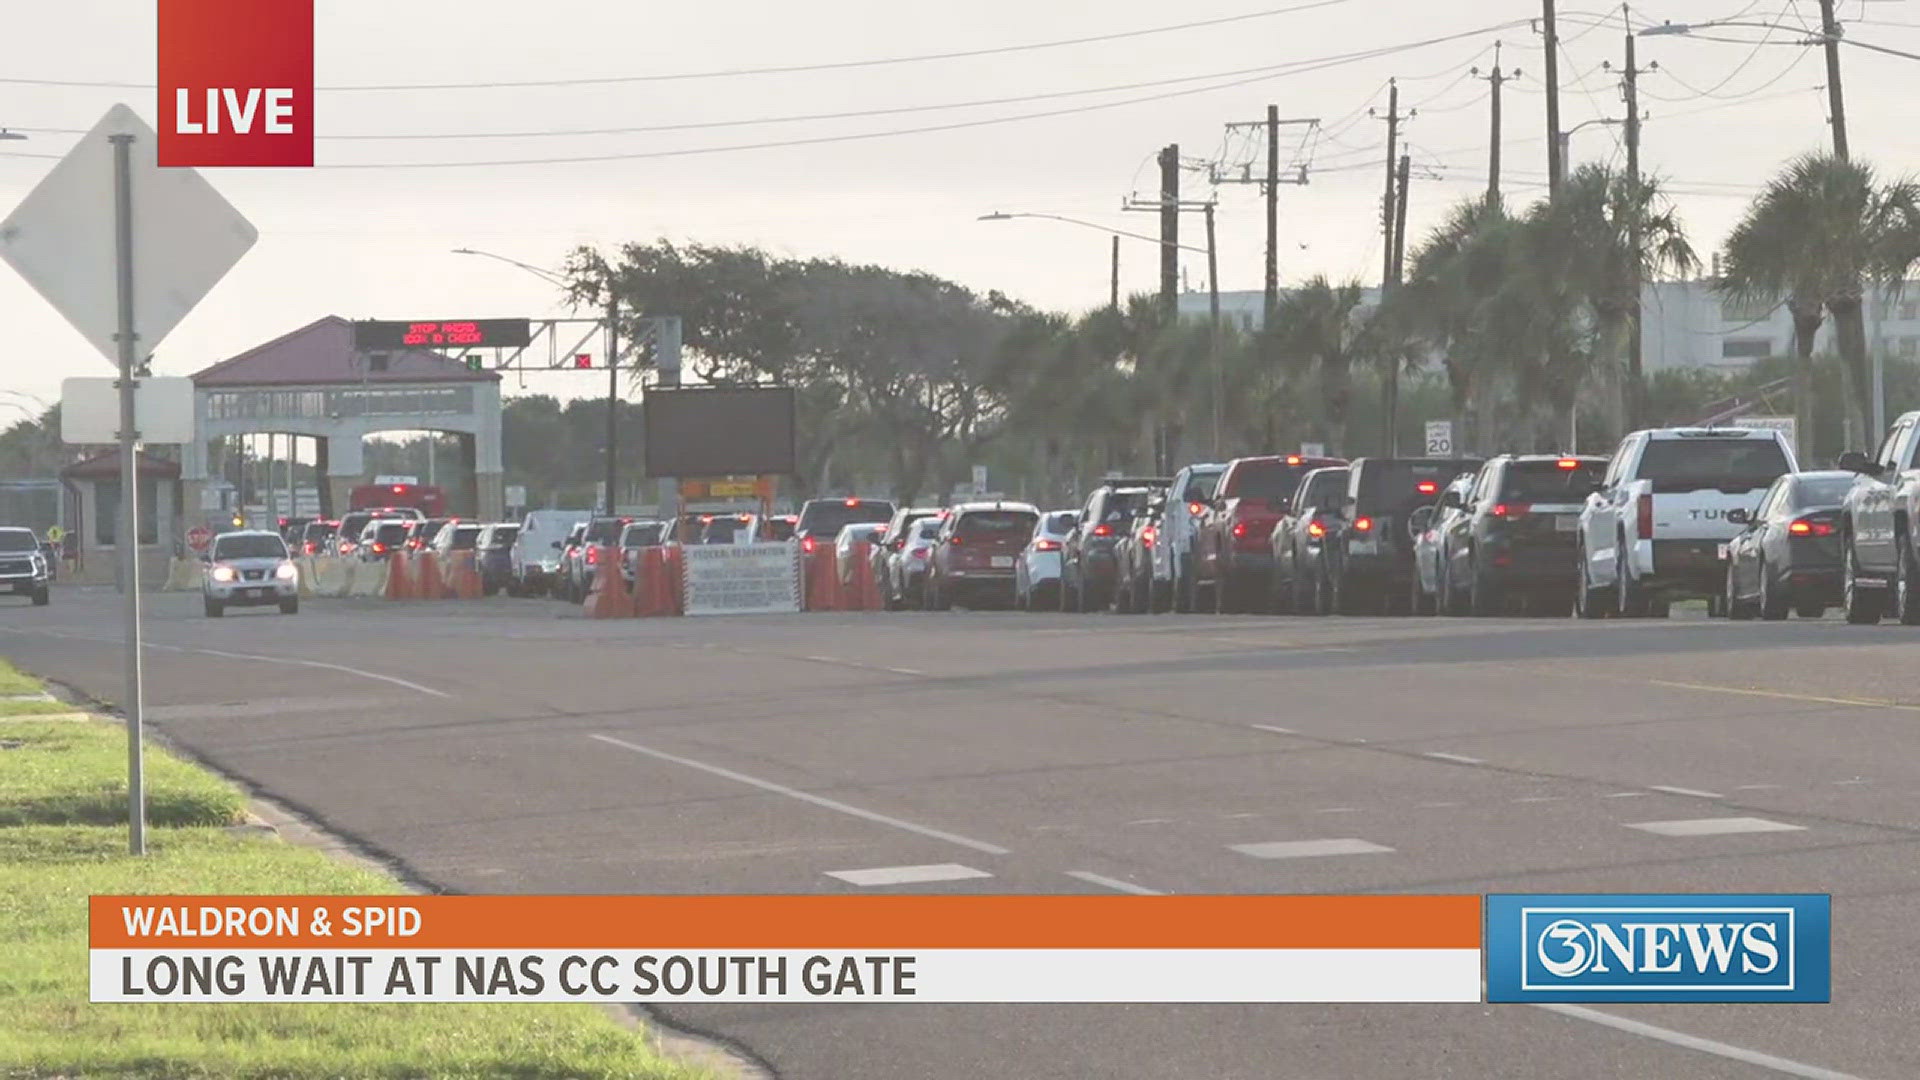 Traffic is backed up. The north gate along Ocean Drive remains closed due to debris from Tropical Storm Alberto.